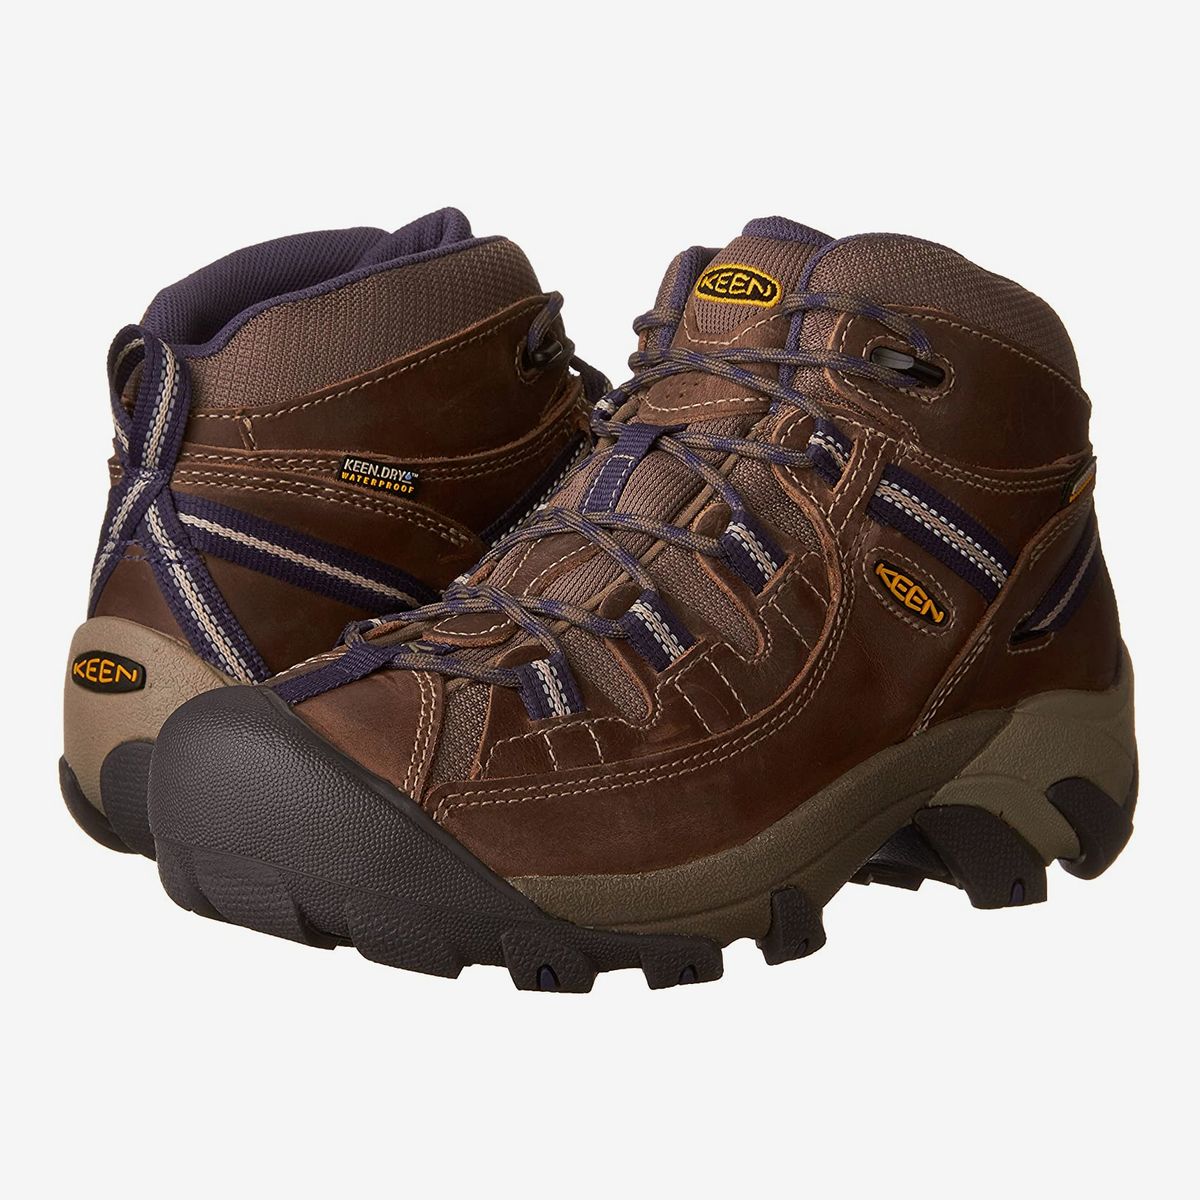 12 Best Women's Hiking Boots 2020 | The 